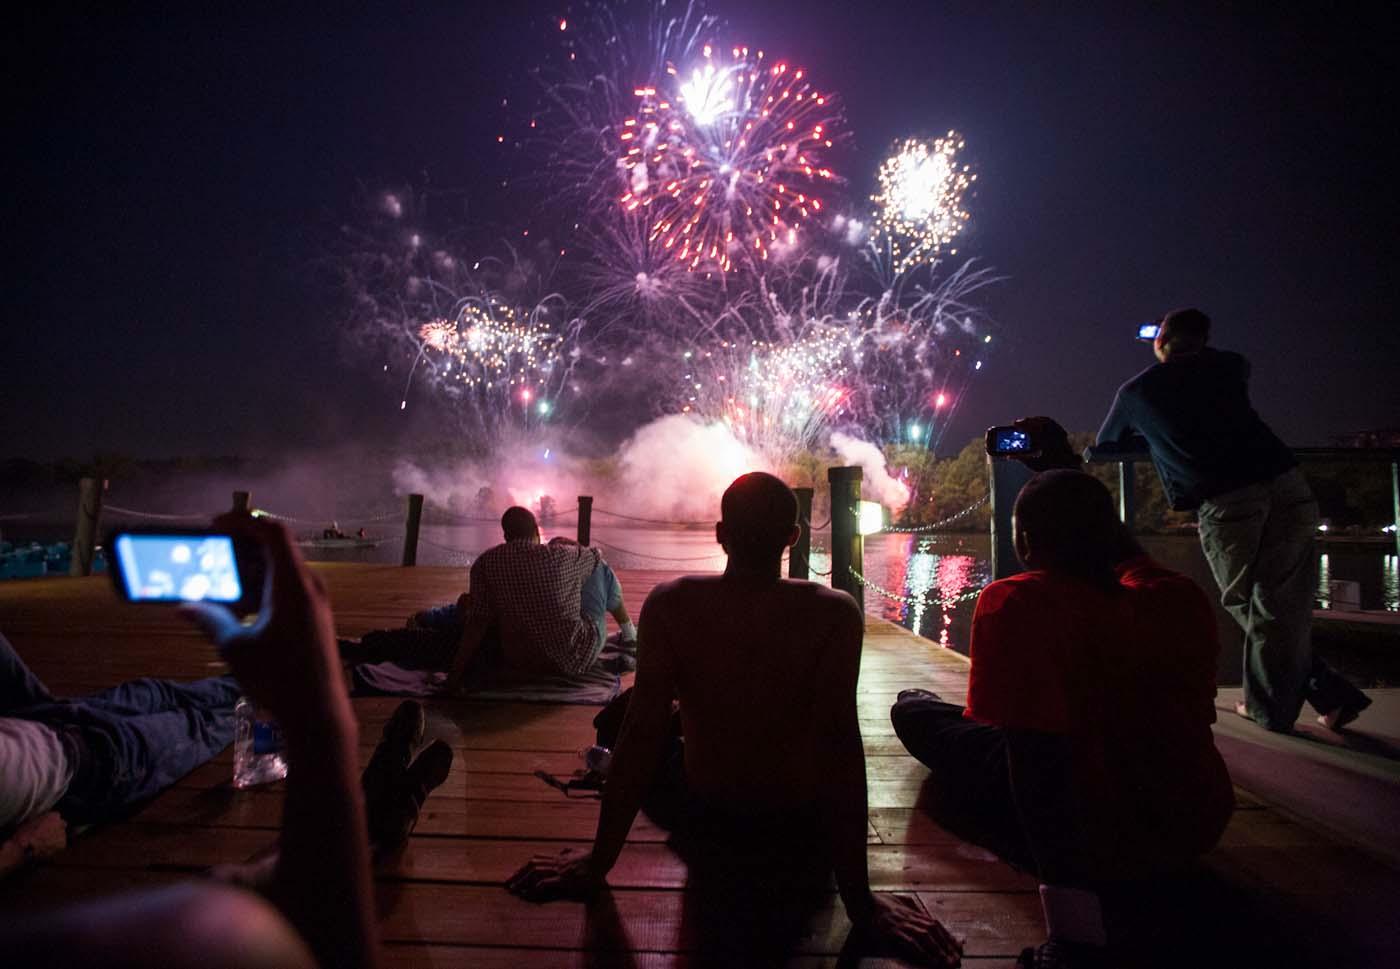 Close-up (from back) of individuals viewing fireworks from boat dock at night